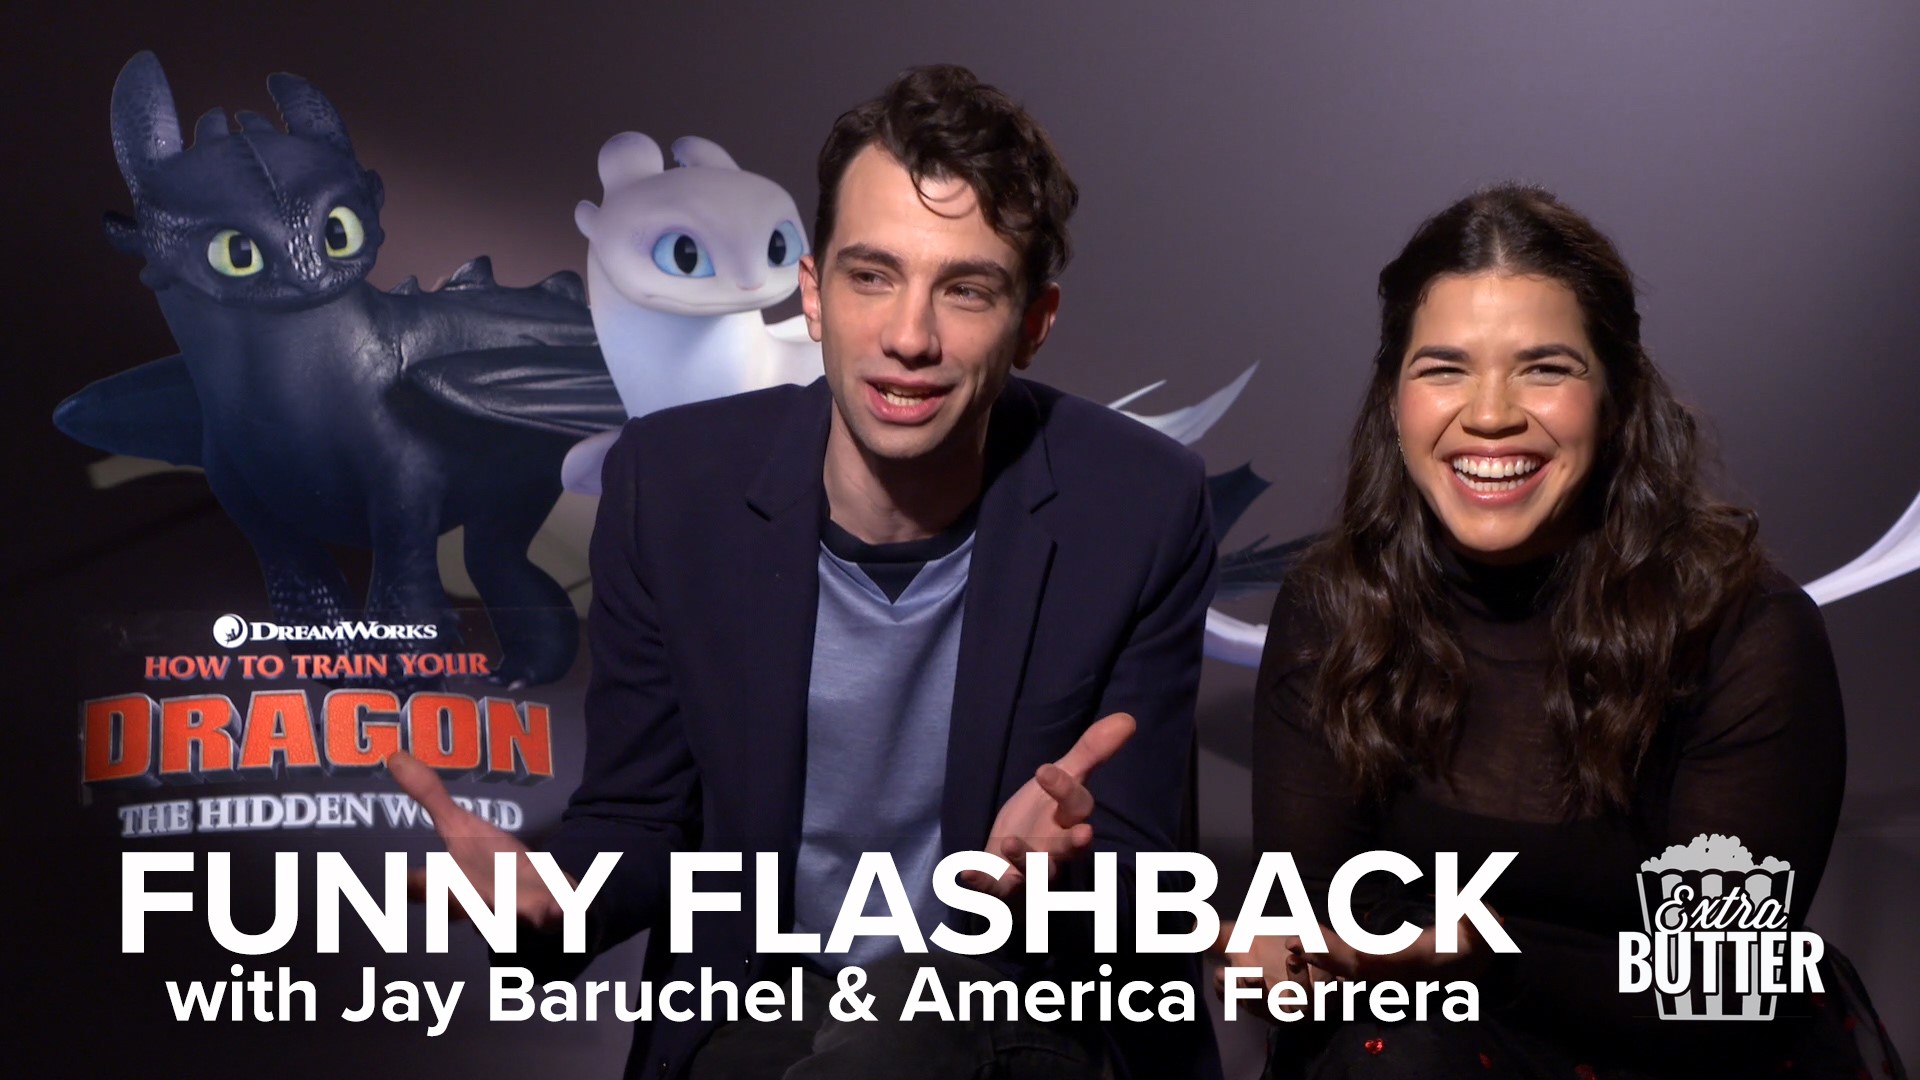 Extra Butter | Jay Baruchel flashes back to an earlier fart-filled interview while talking about 'How to Train Your Dragon: The Hidden World.' Mark S. Allen also thanks Jay & America Ferrera for helping to raise his kids. Jay also talks about his favorite Dragon. Interview arranged by Universal Pictures.